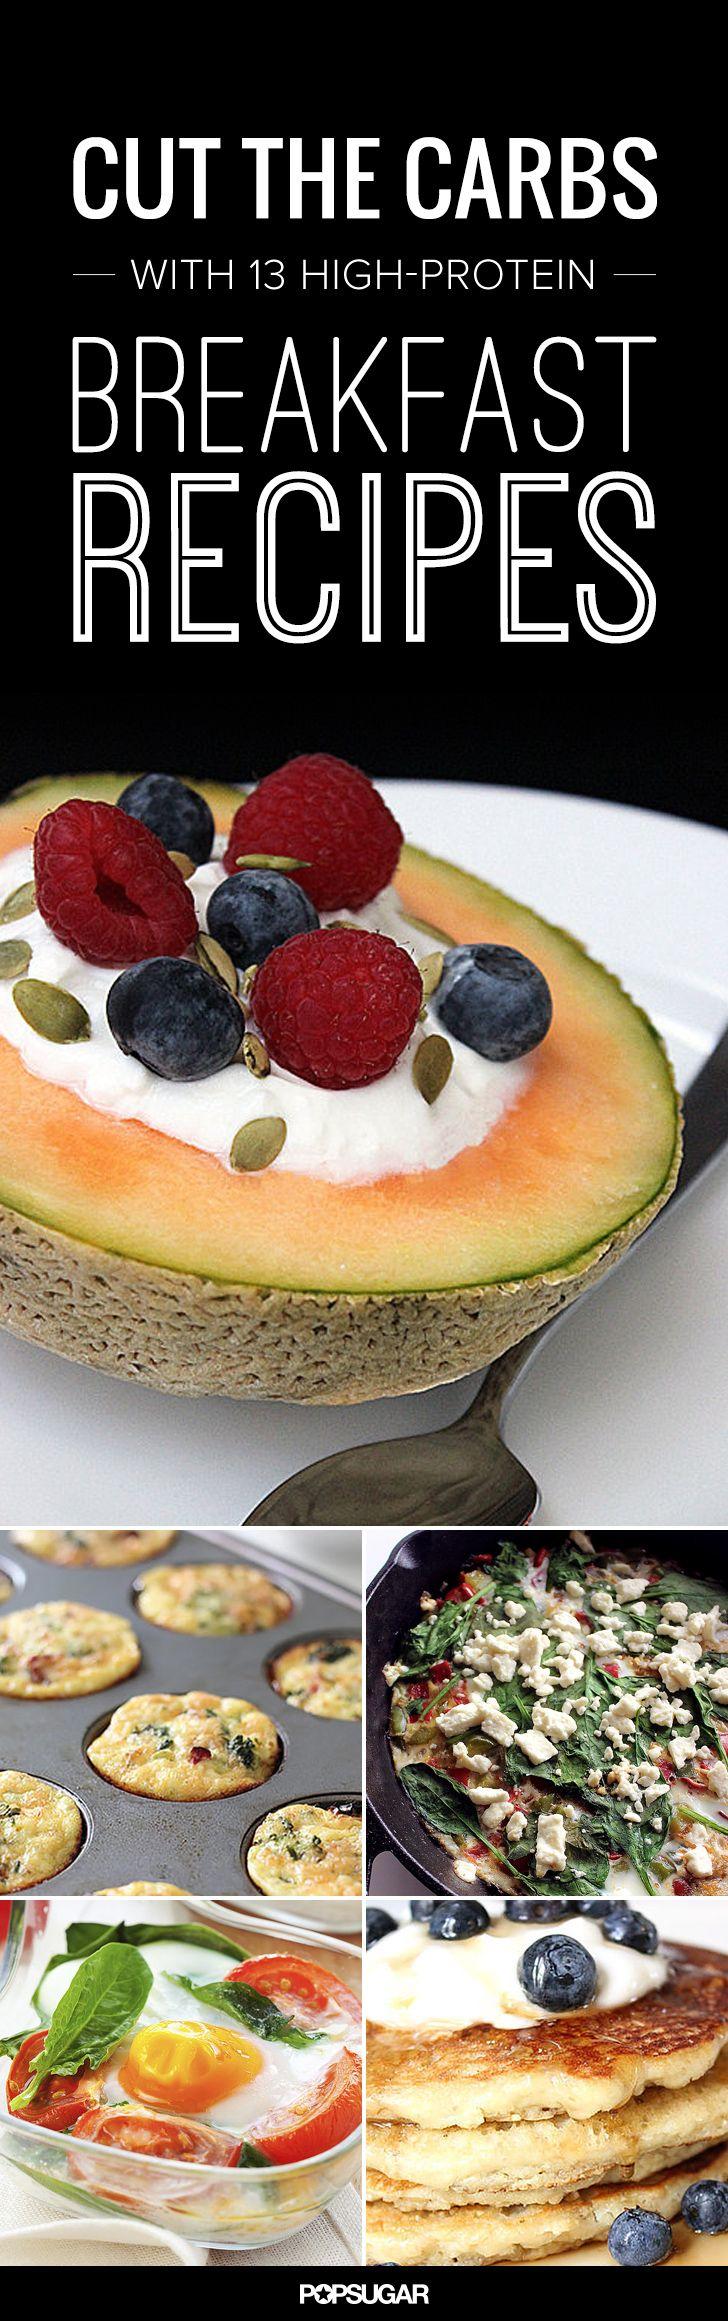 Wedding - 17 High-Protein, Low-Carb Breakfast Ideas For Weight Loss